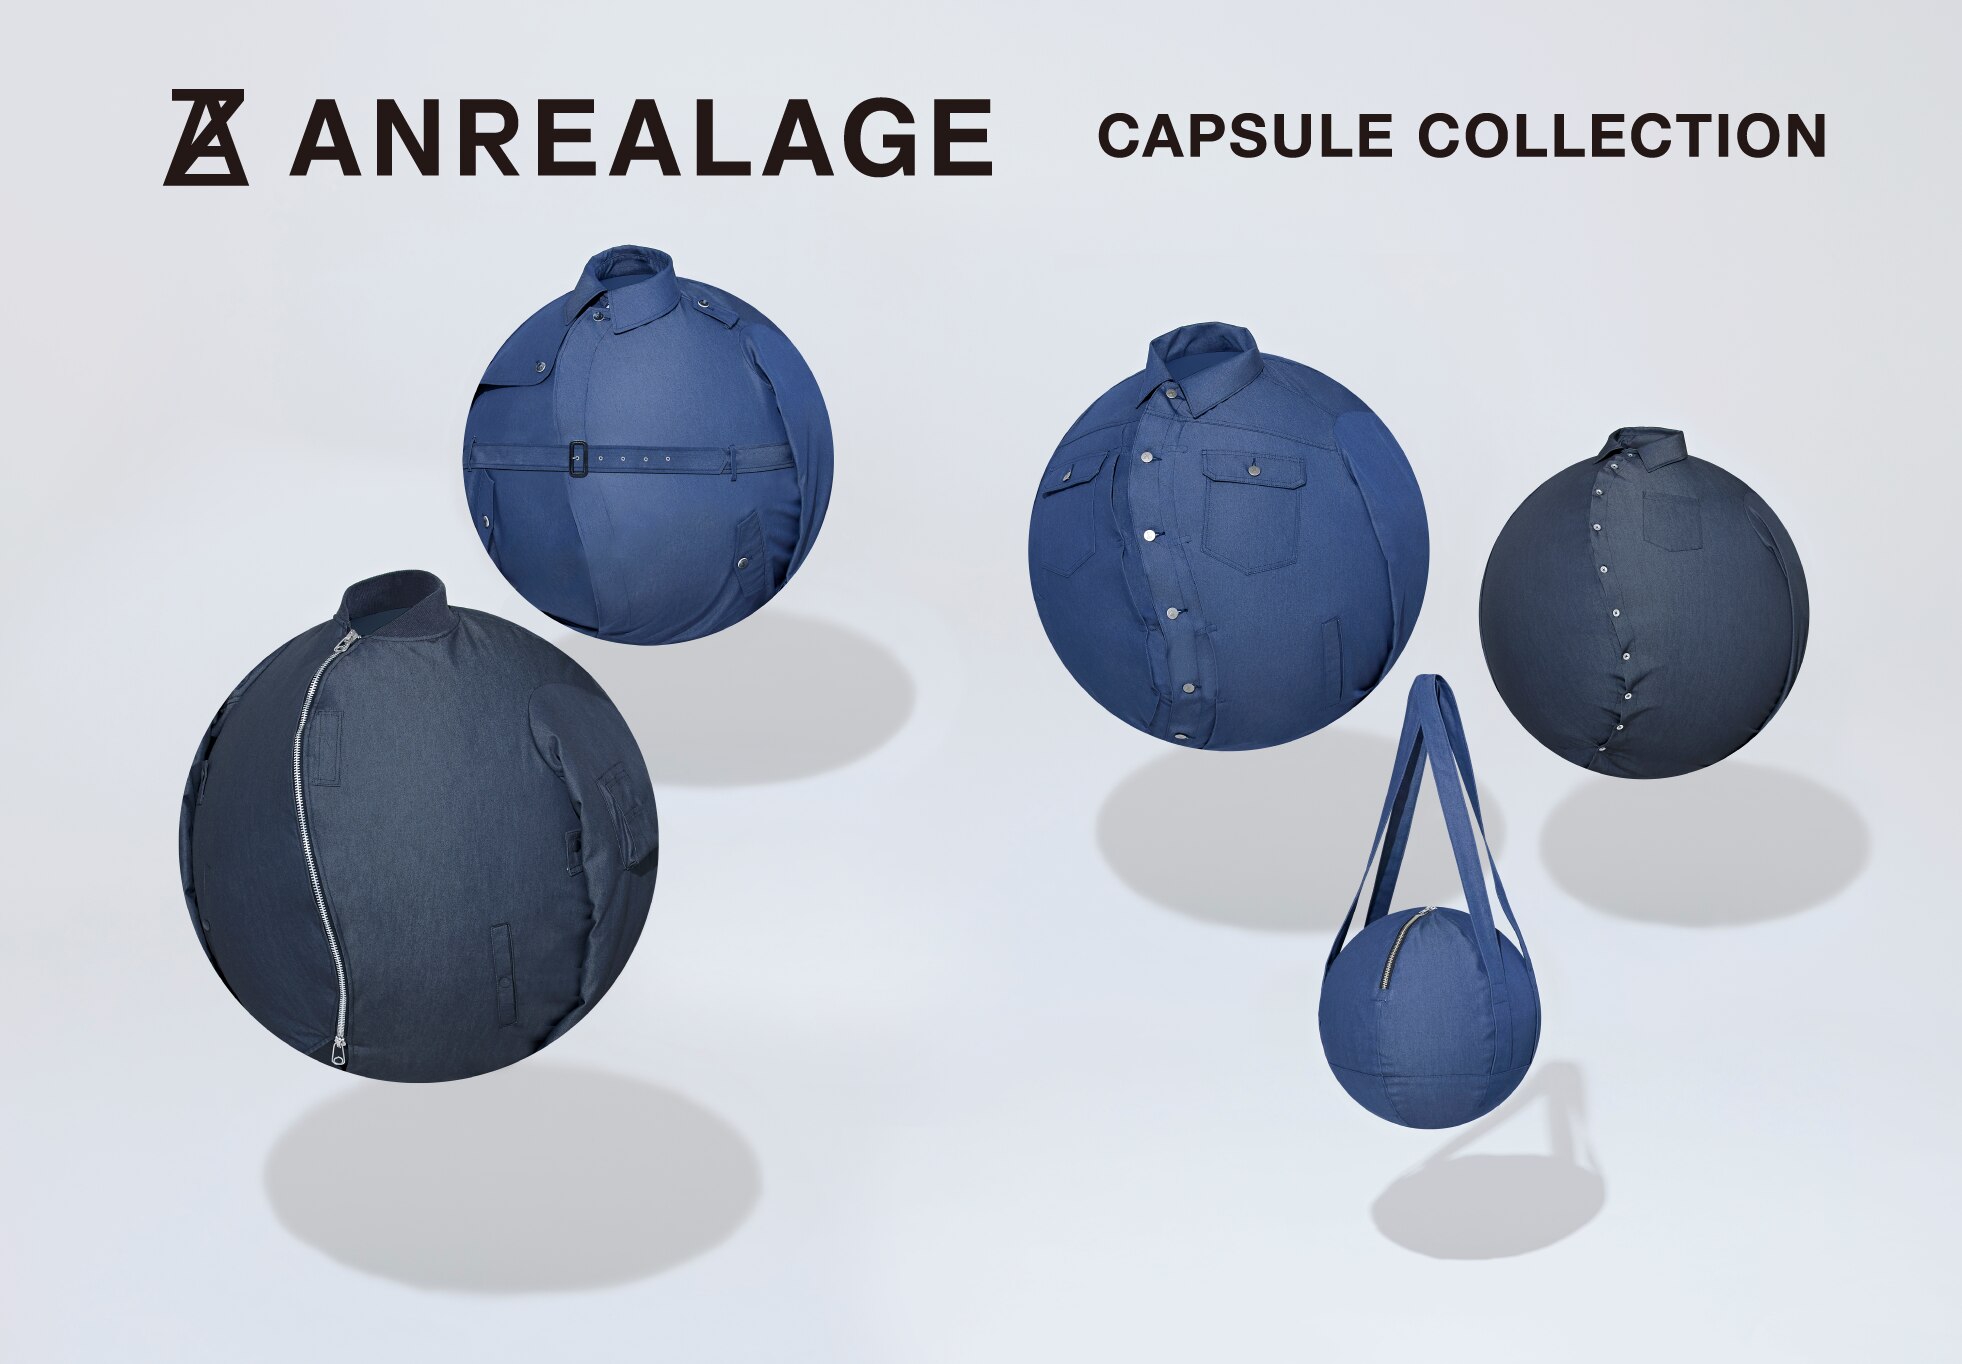 ANREALAGE CAPSULE COLLECTION